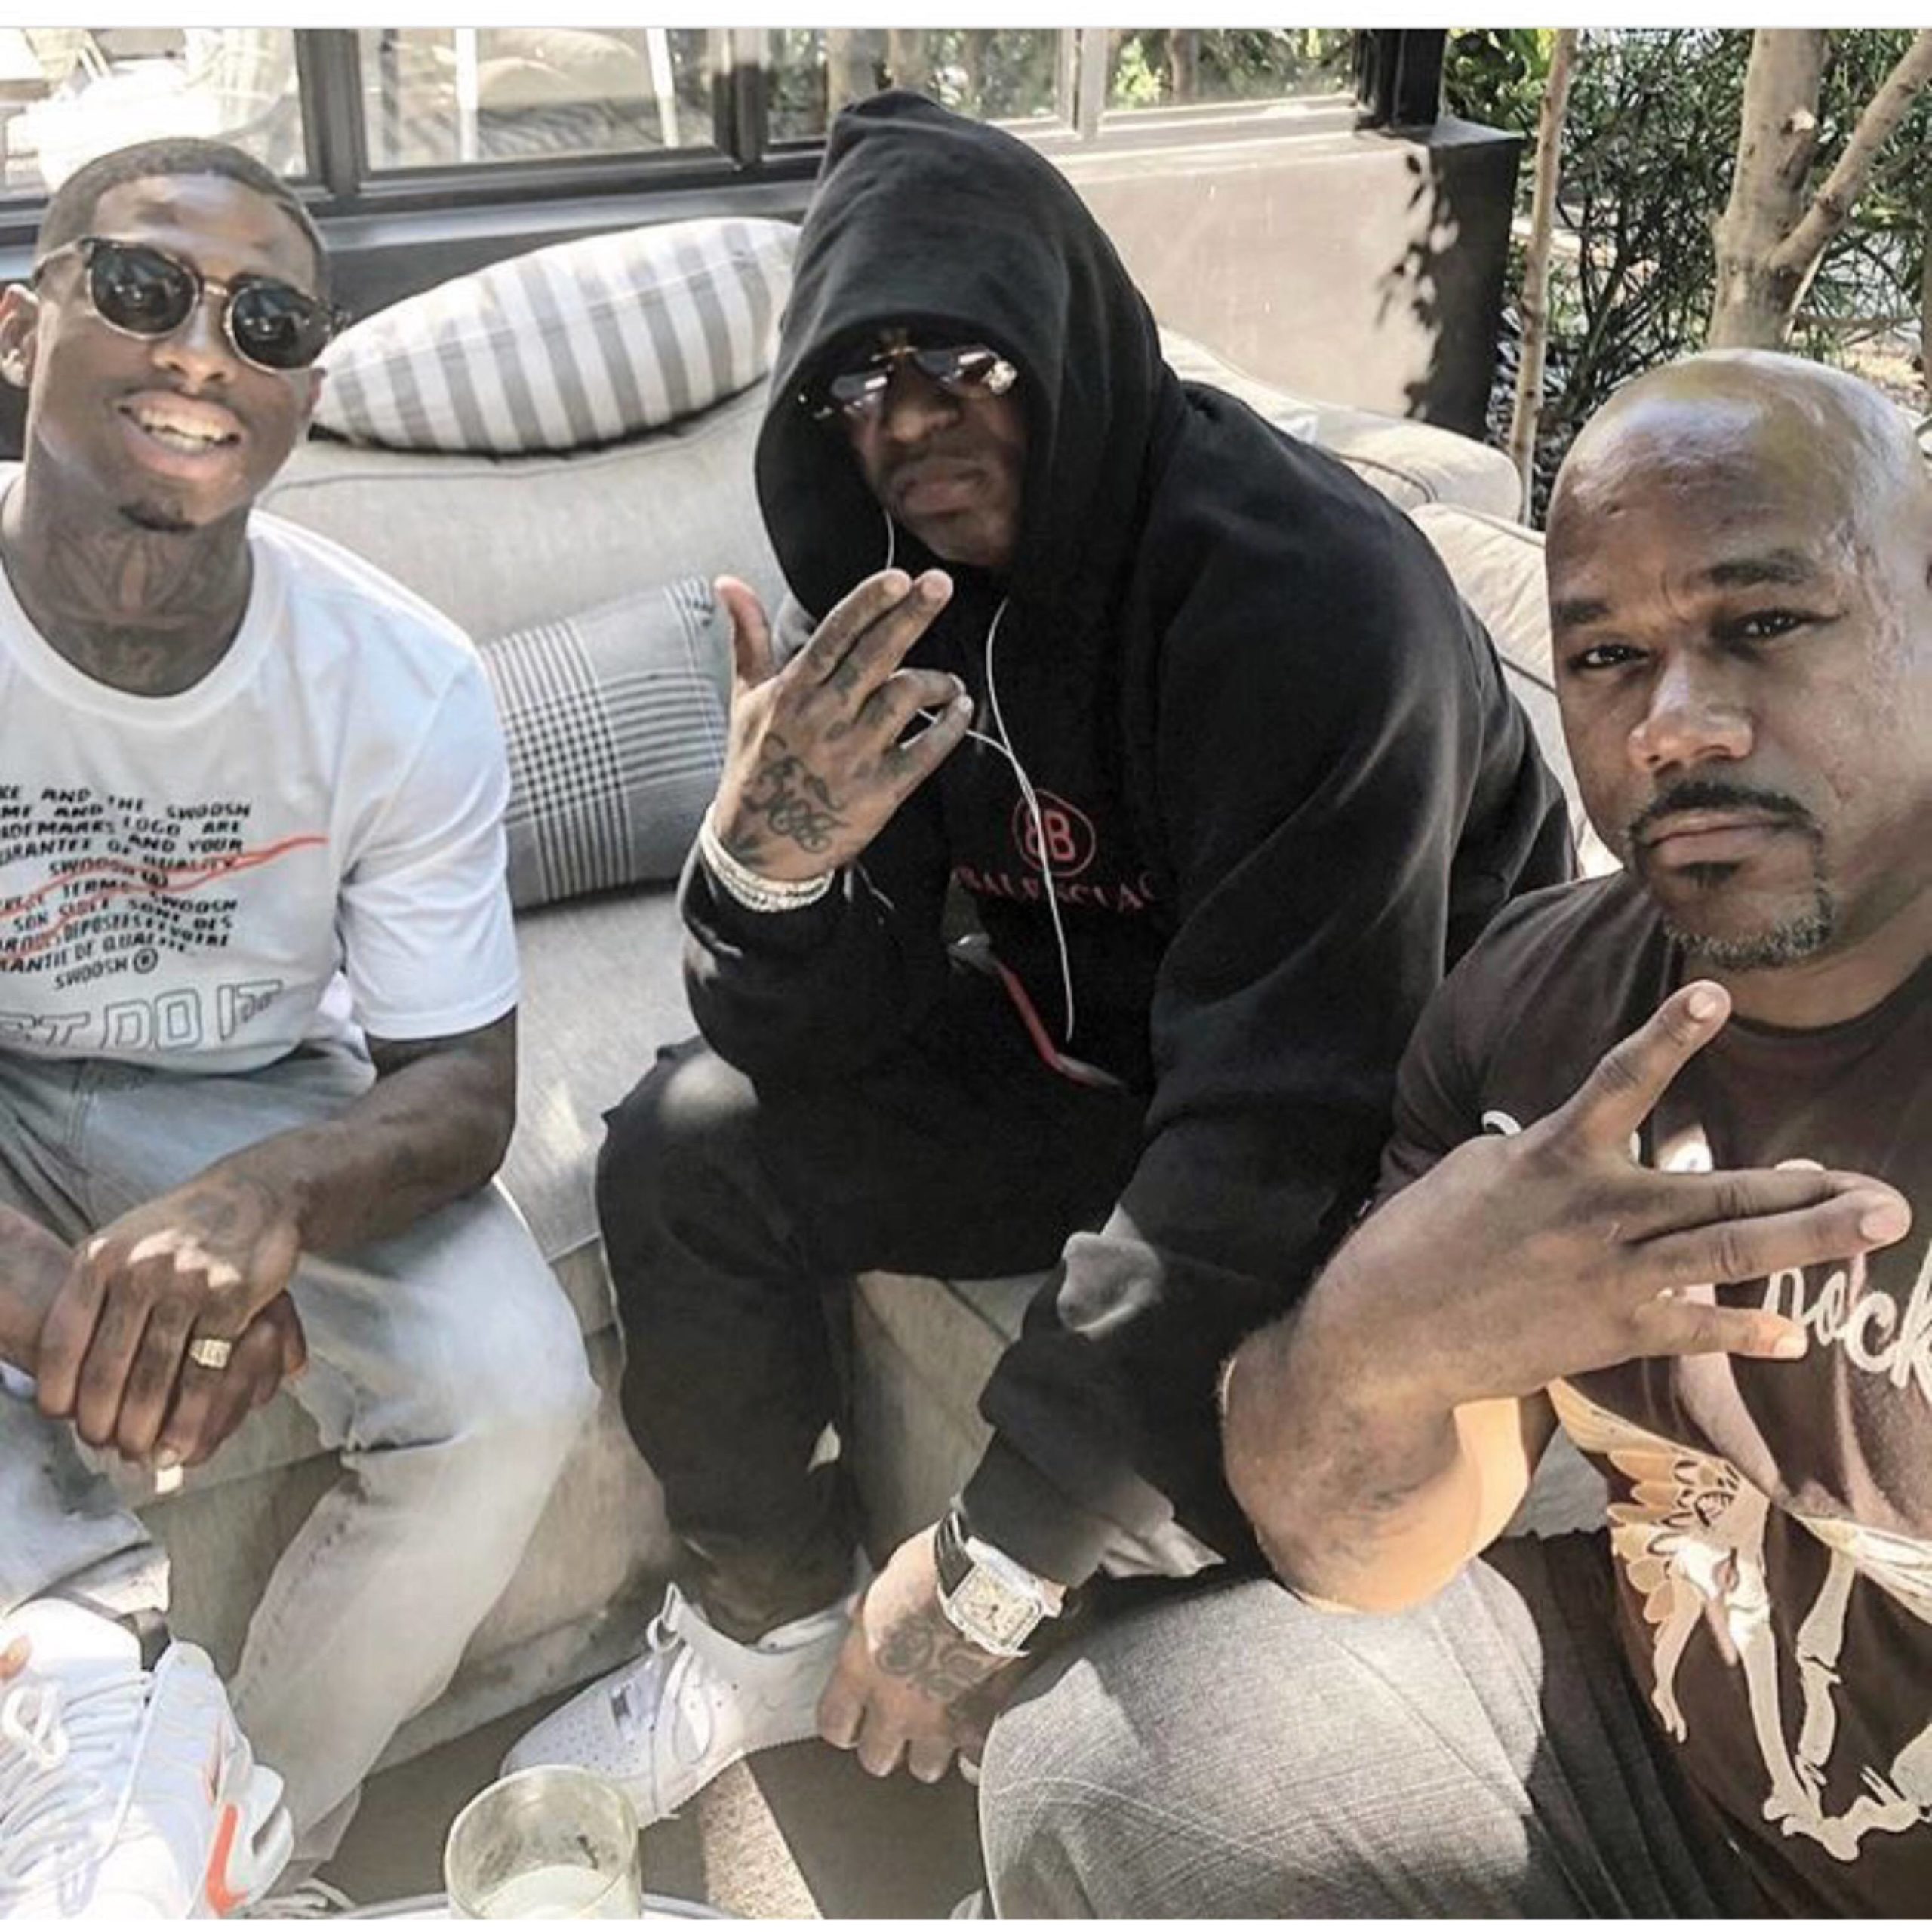 Birdman Launches New Record Label ‘Cash Money West’ & Signs First Artist